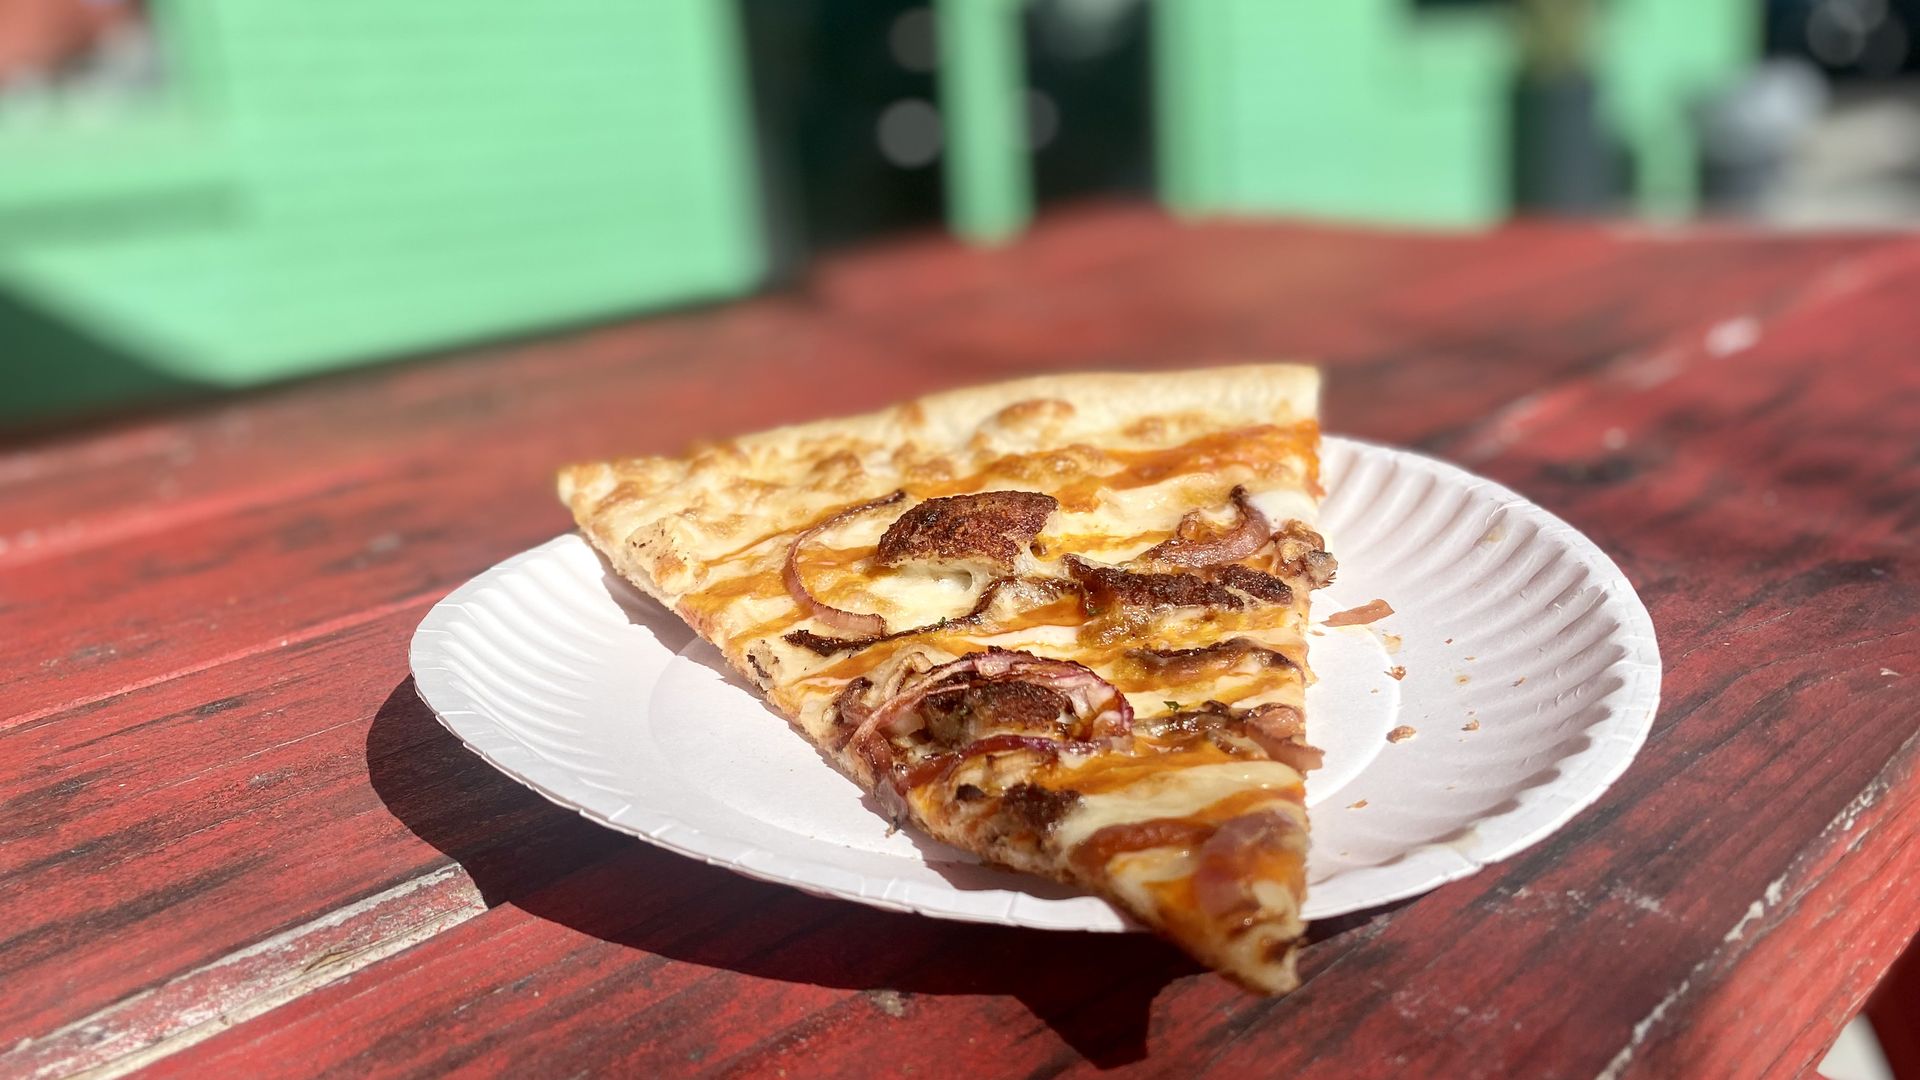 A slice of pizza on a picnic table.